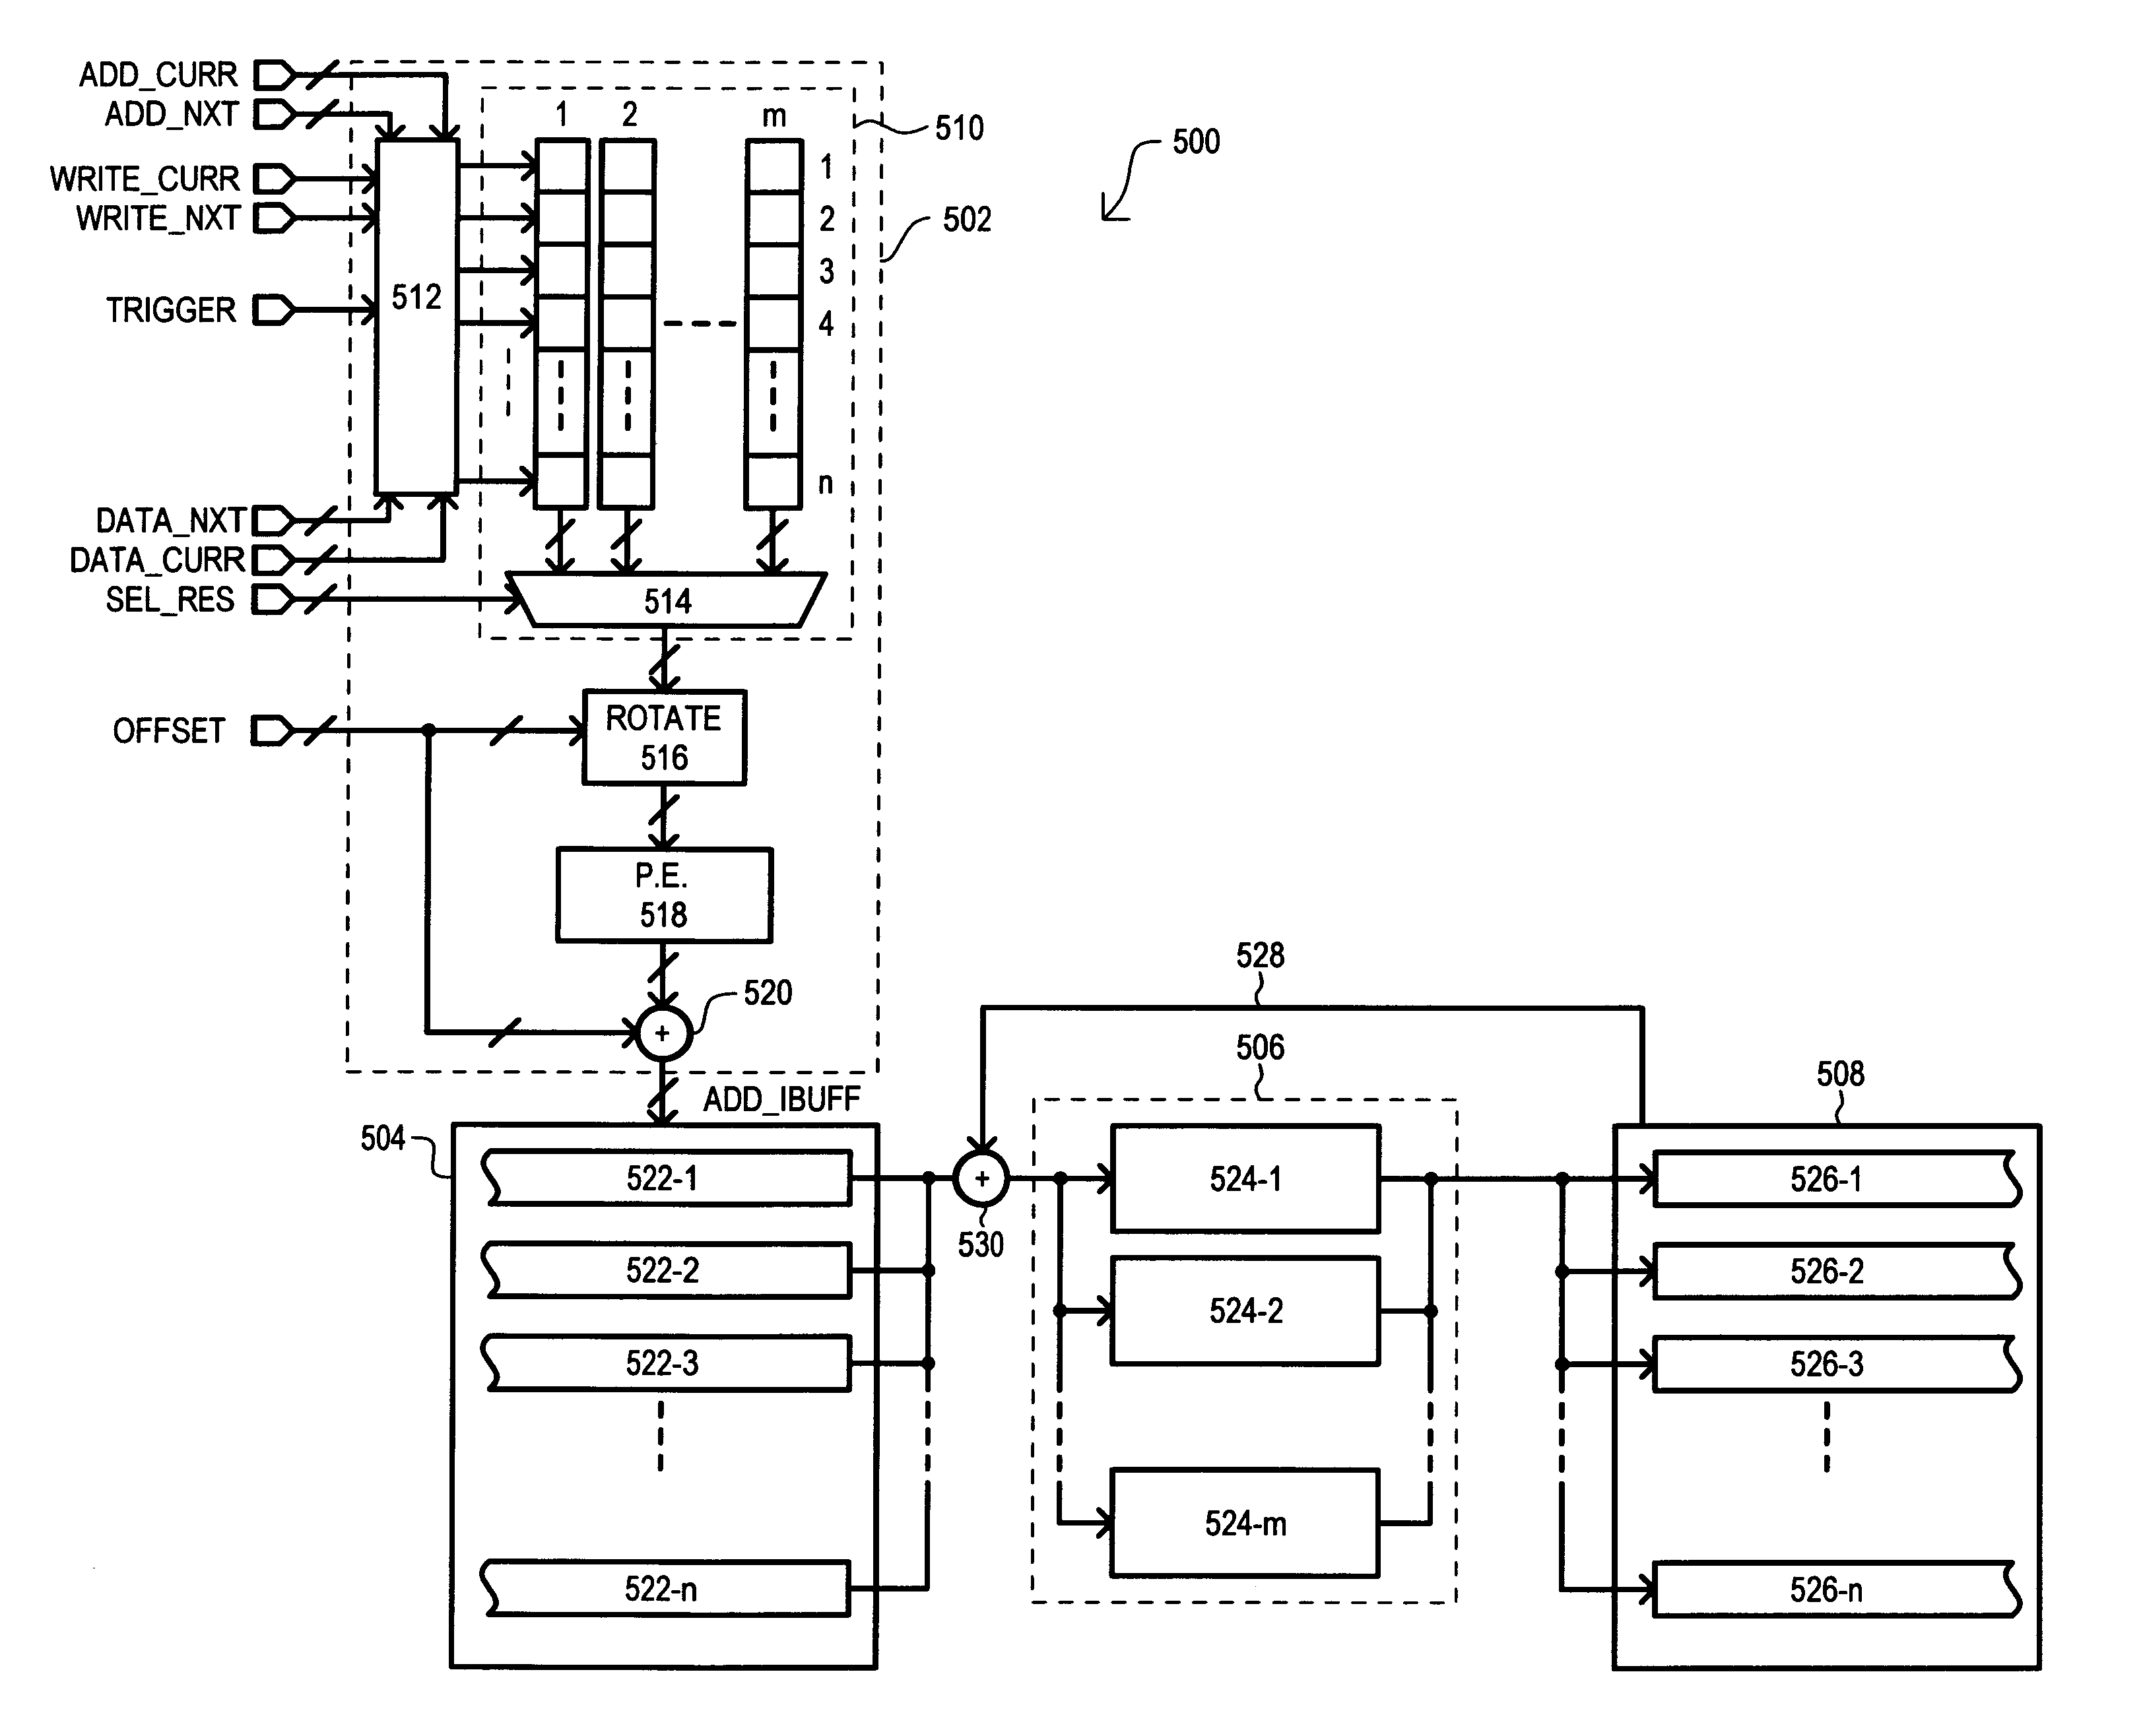 High throughput system for encryption and other data operations